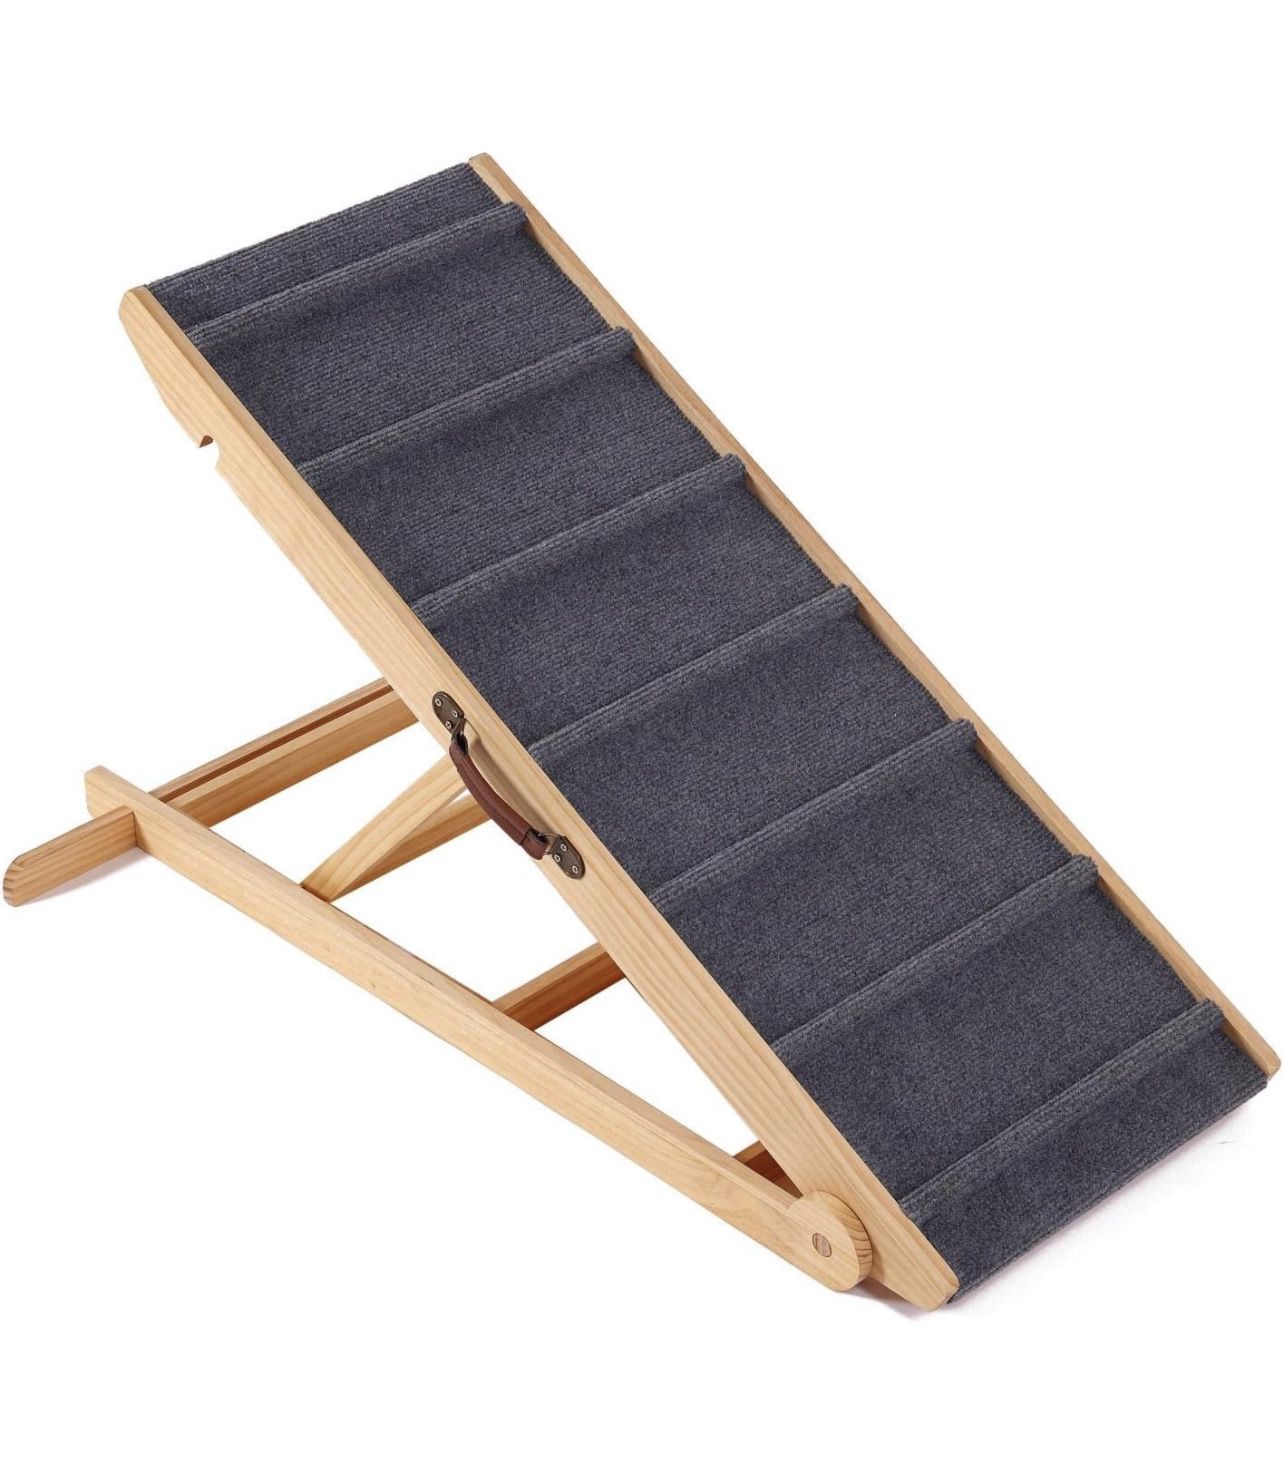 NEW PINE WOOD DOG PET RAMP Portable Steps & 6 Adjustable Incline Settings For High Beds SUV Small To Large Dogs 450 Lbs🔥